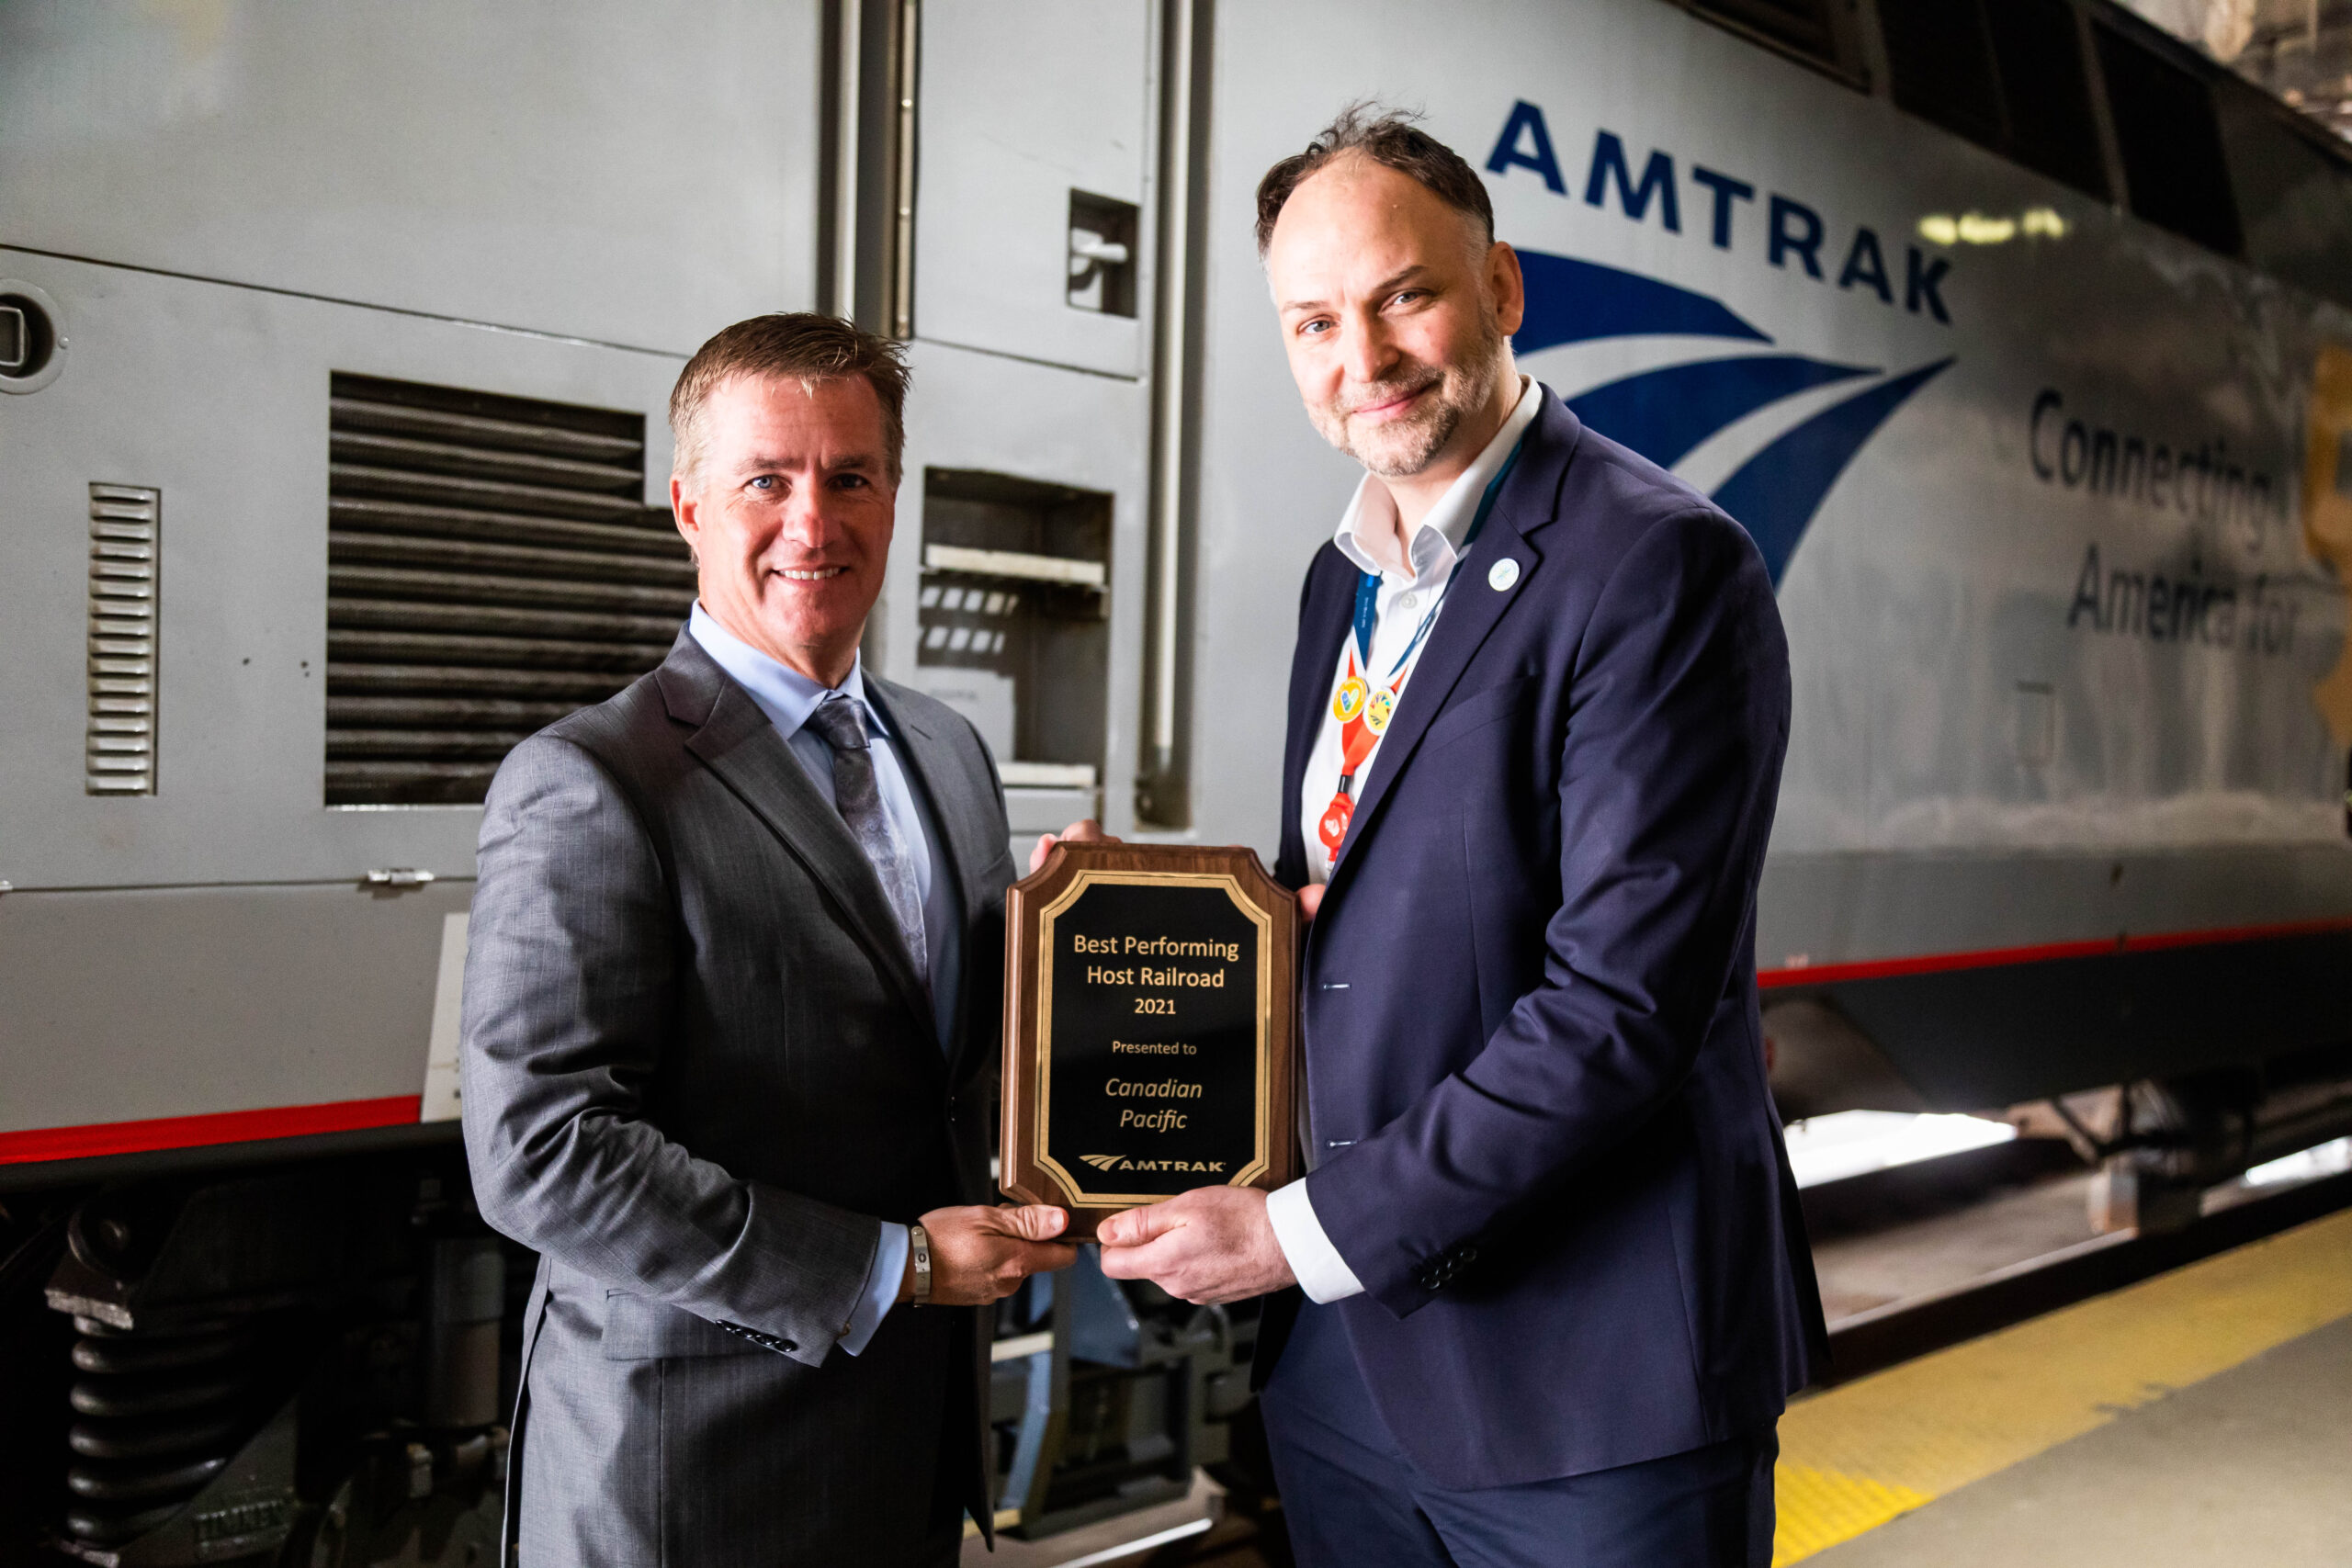 Amtrak recognises Canadian Pacific as best host railroad 2021